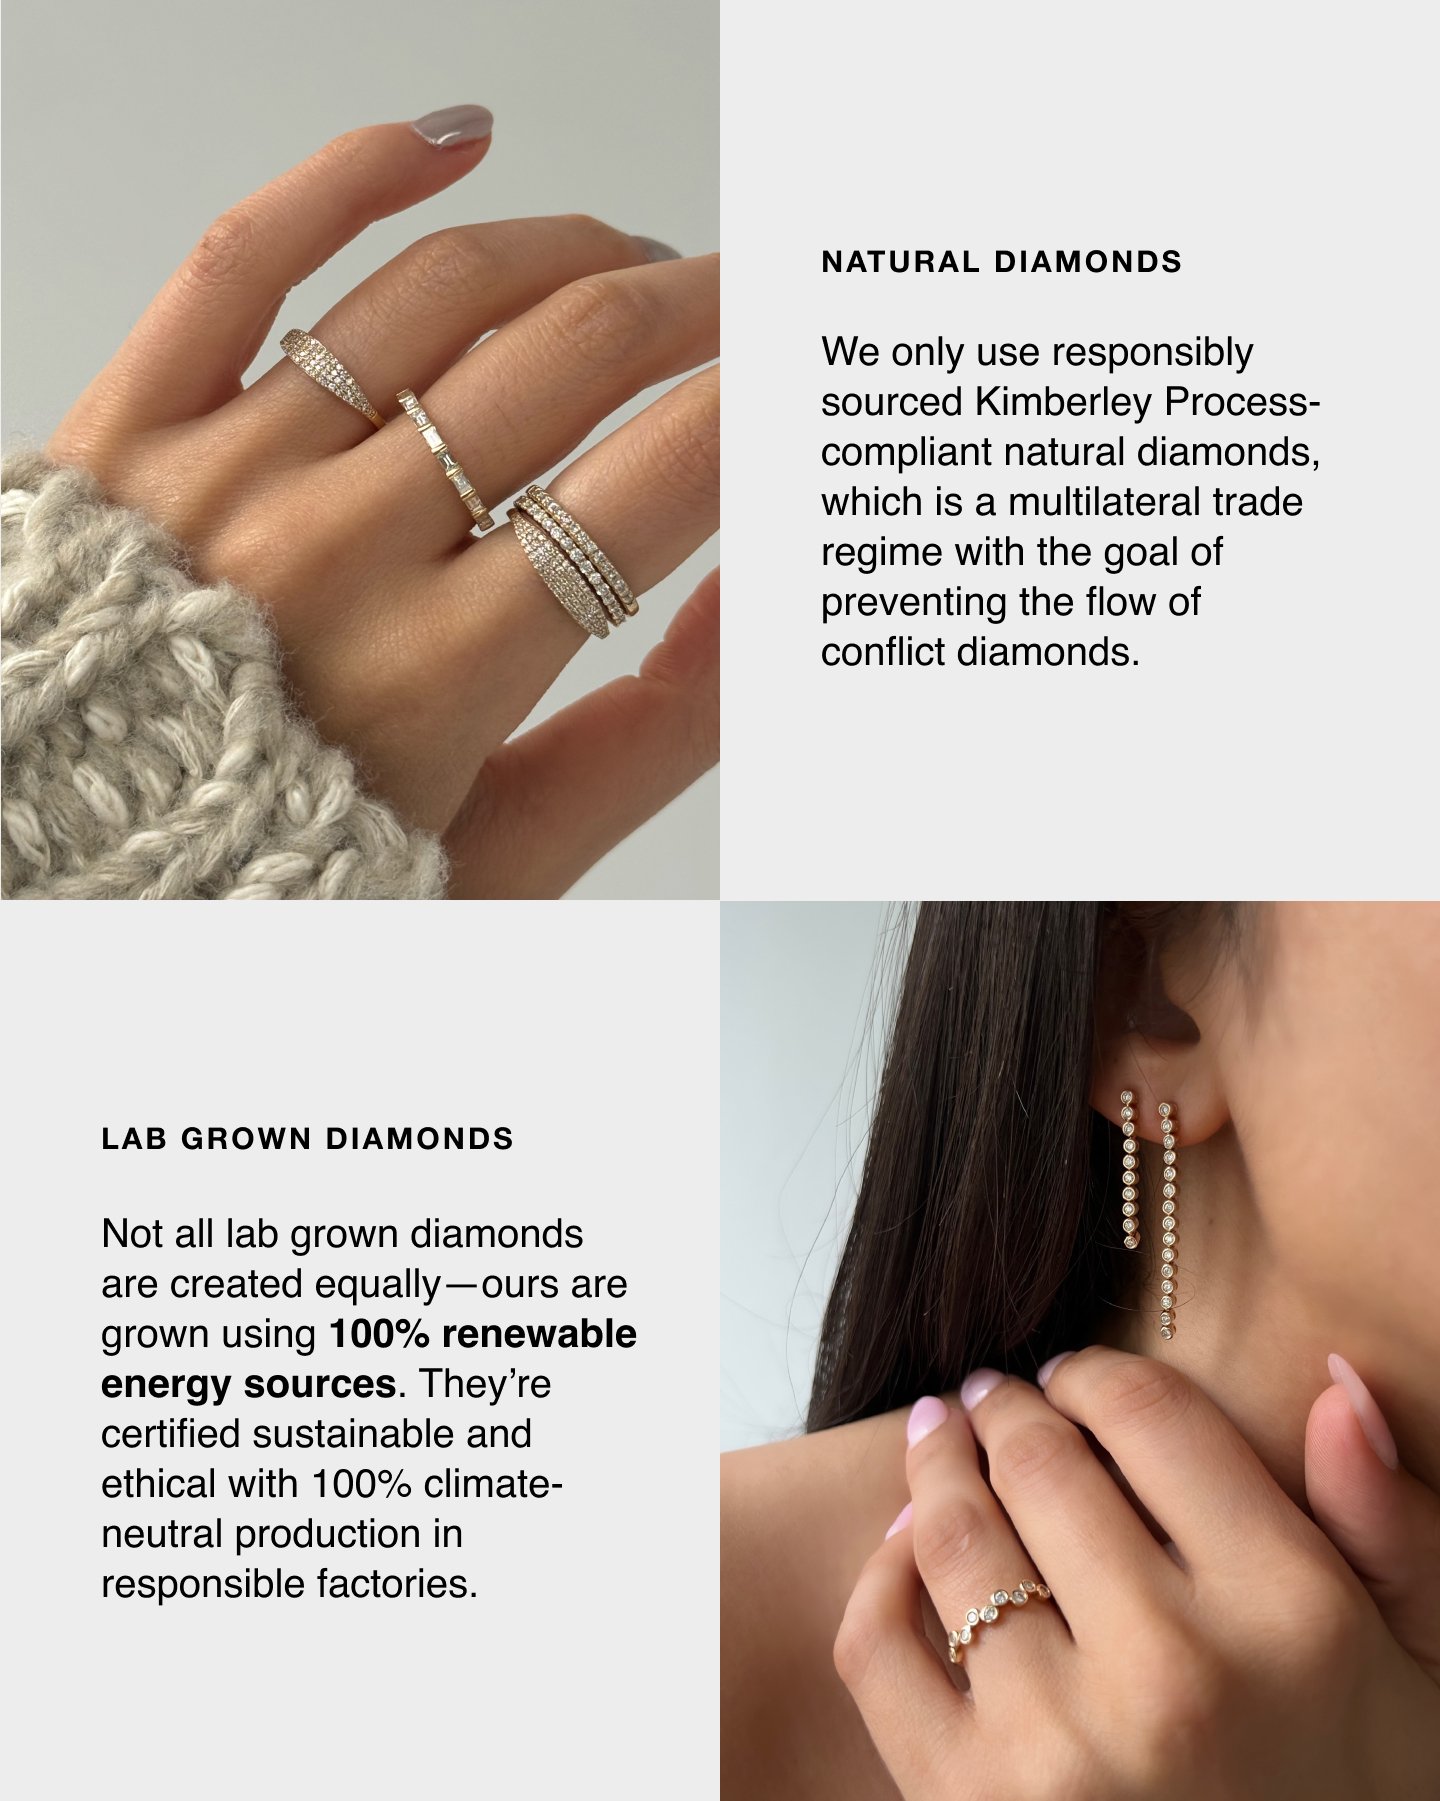 Natural Diamonds. We only use responsibly sourced Kimberely Process-compliant natural diamonds, which is a multilateral trade regime with the goal of preventing the flow of conflict diamonds. Lab Grown Diamonds. Not all lab grown diamonds are created equally-ours are grown using 100% renewable energy sources. They're certified sustainable and ethical with 100% climate-neutral production in responsible factories. 